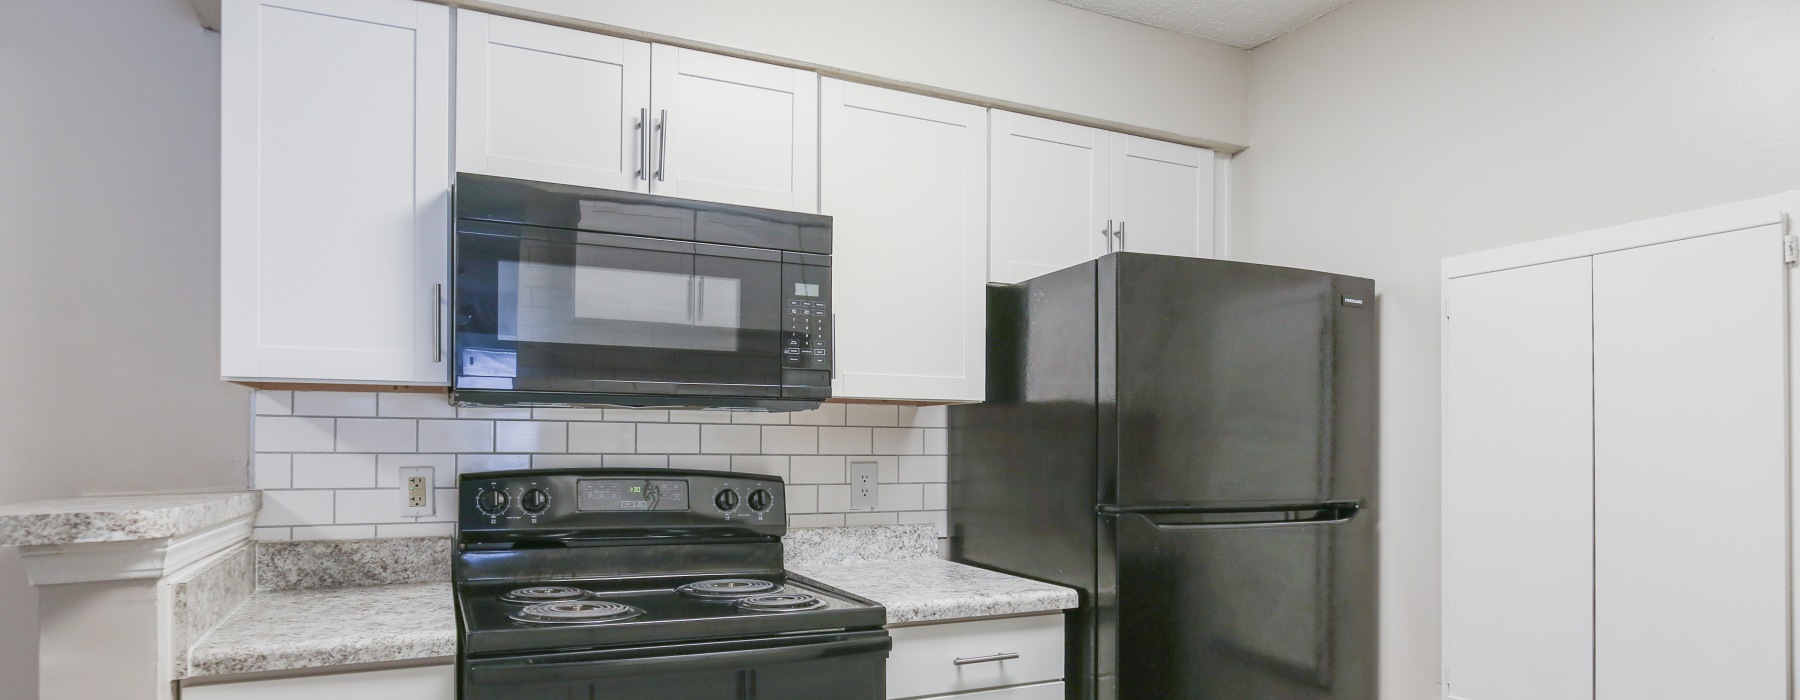 Apartment kitchen with white cabinets and black appliances